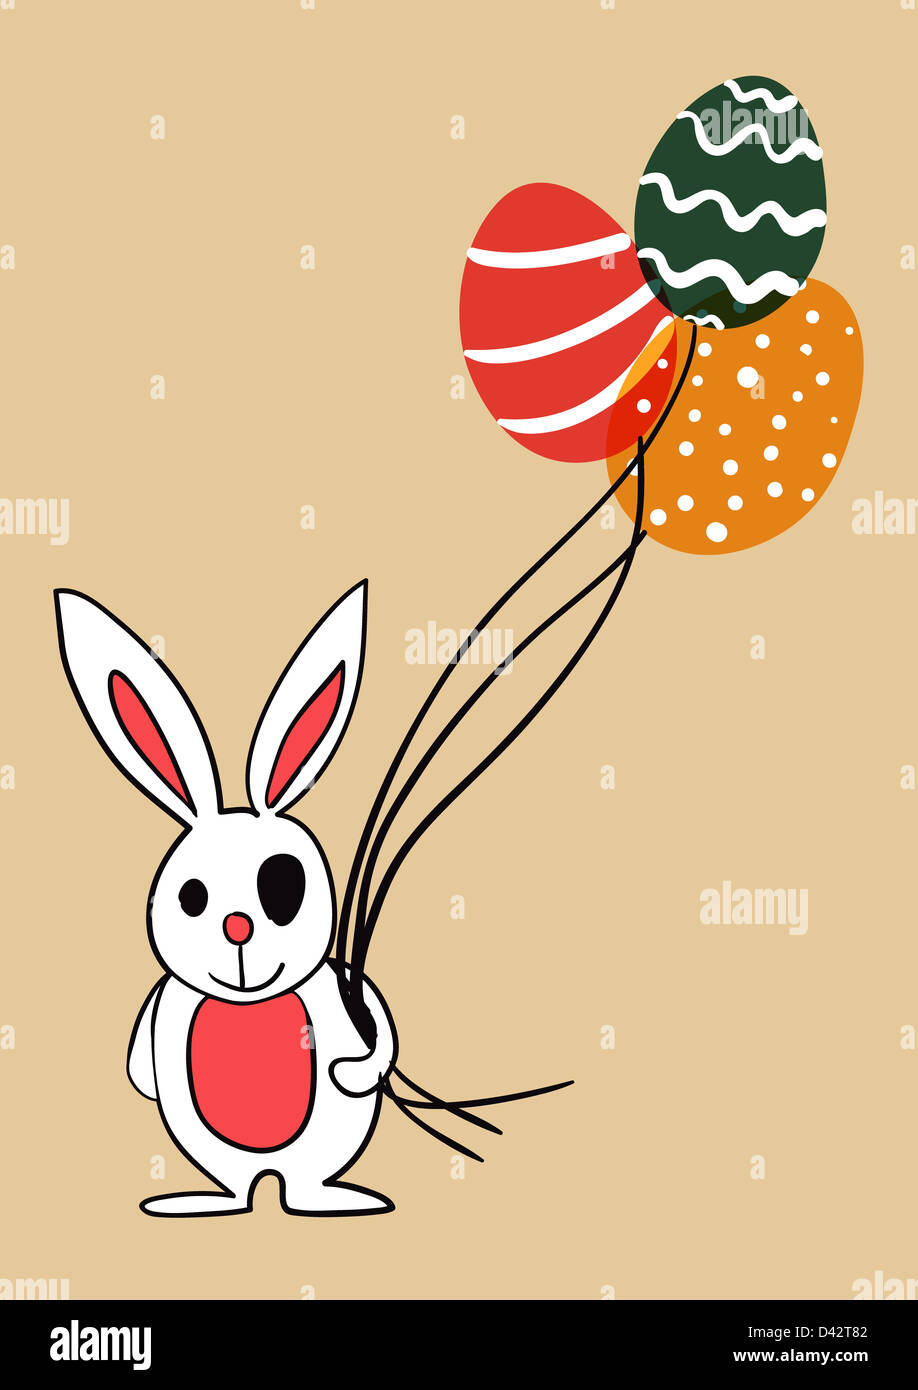 Easter bunny with eggs as balloons. EPS10 file version. This illustration contains transparencies and is layered for easy manipulation and custom coloring Stock Photo